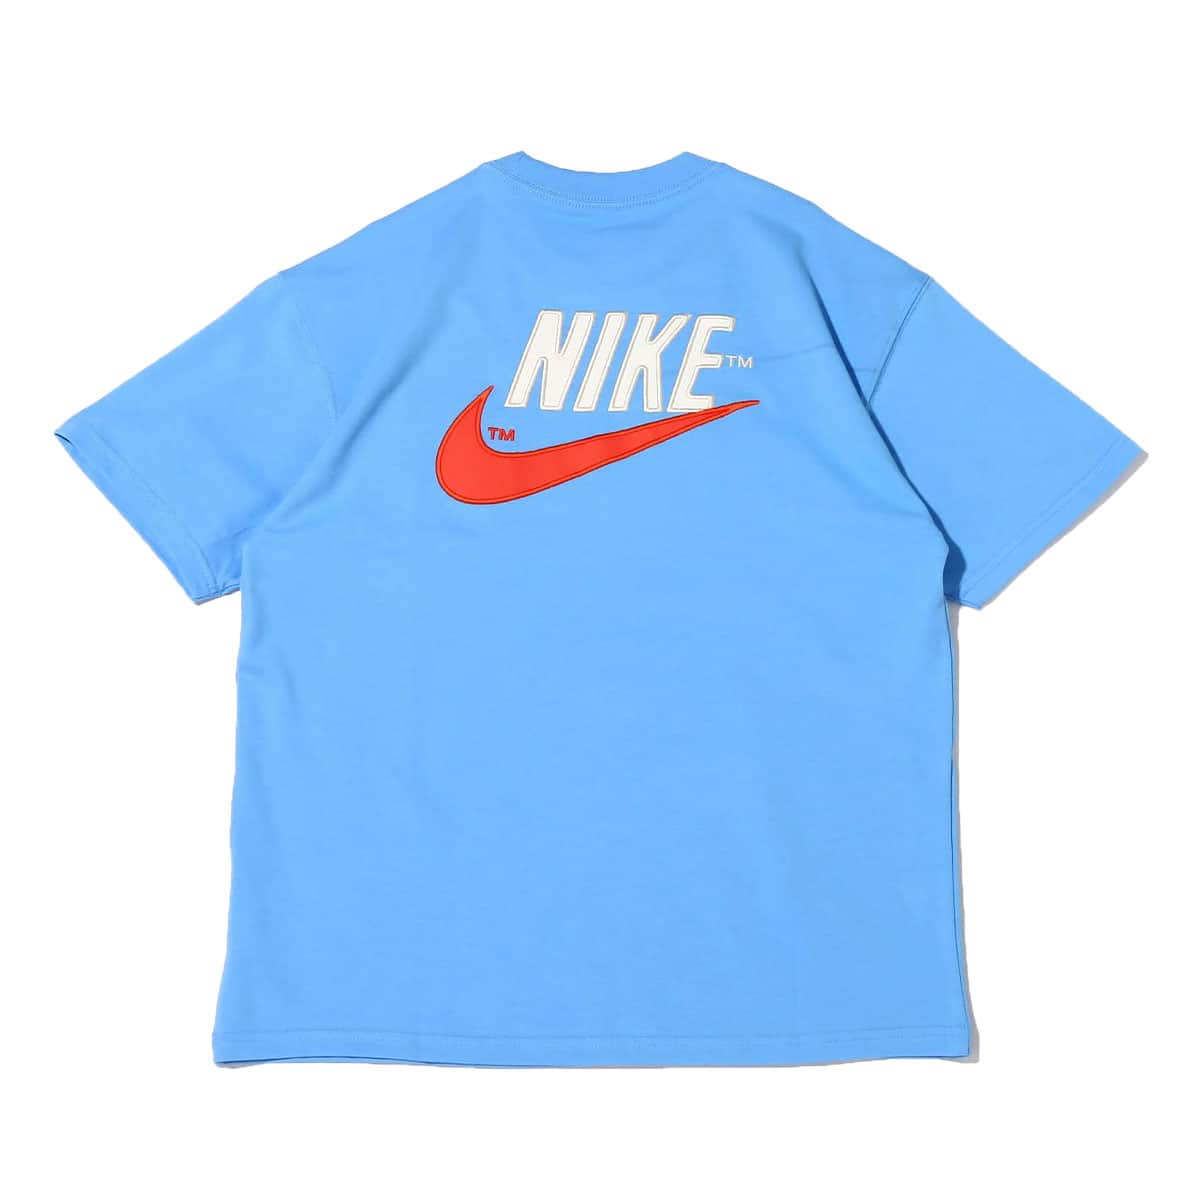 NIKE AS M NSW TEE TREND MAX90 2 UNIVERSITY BLUE 21SP-I